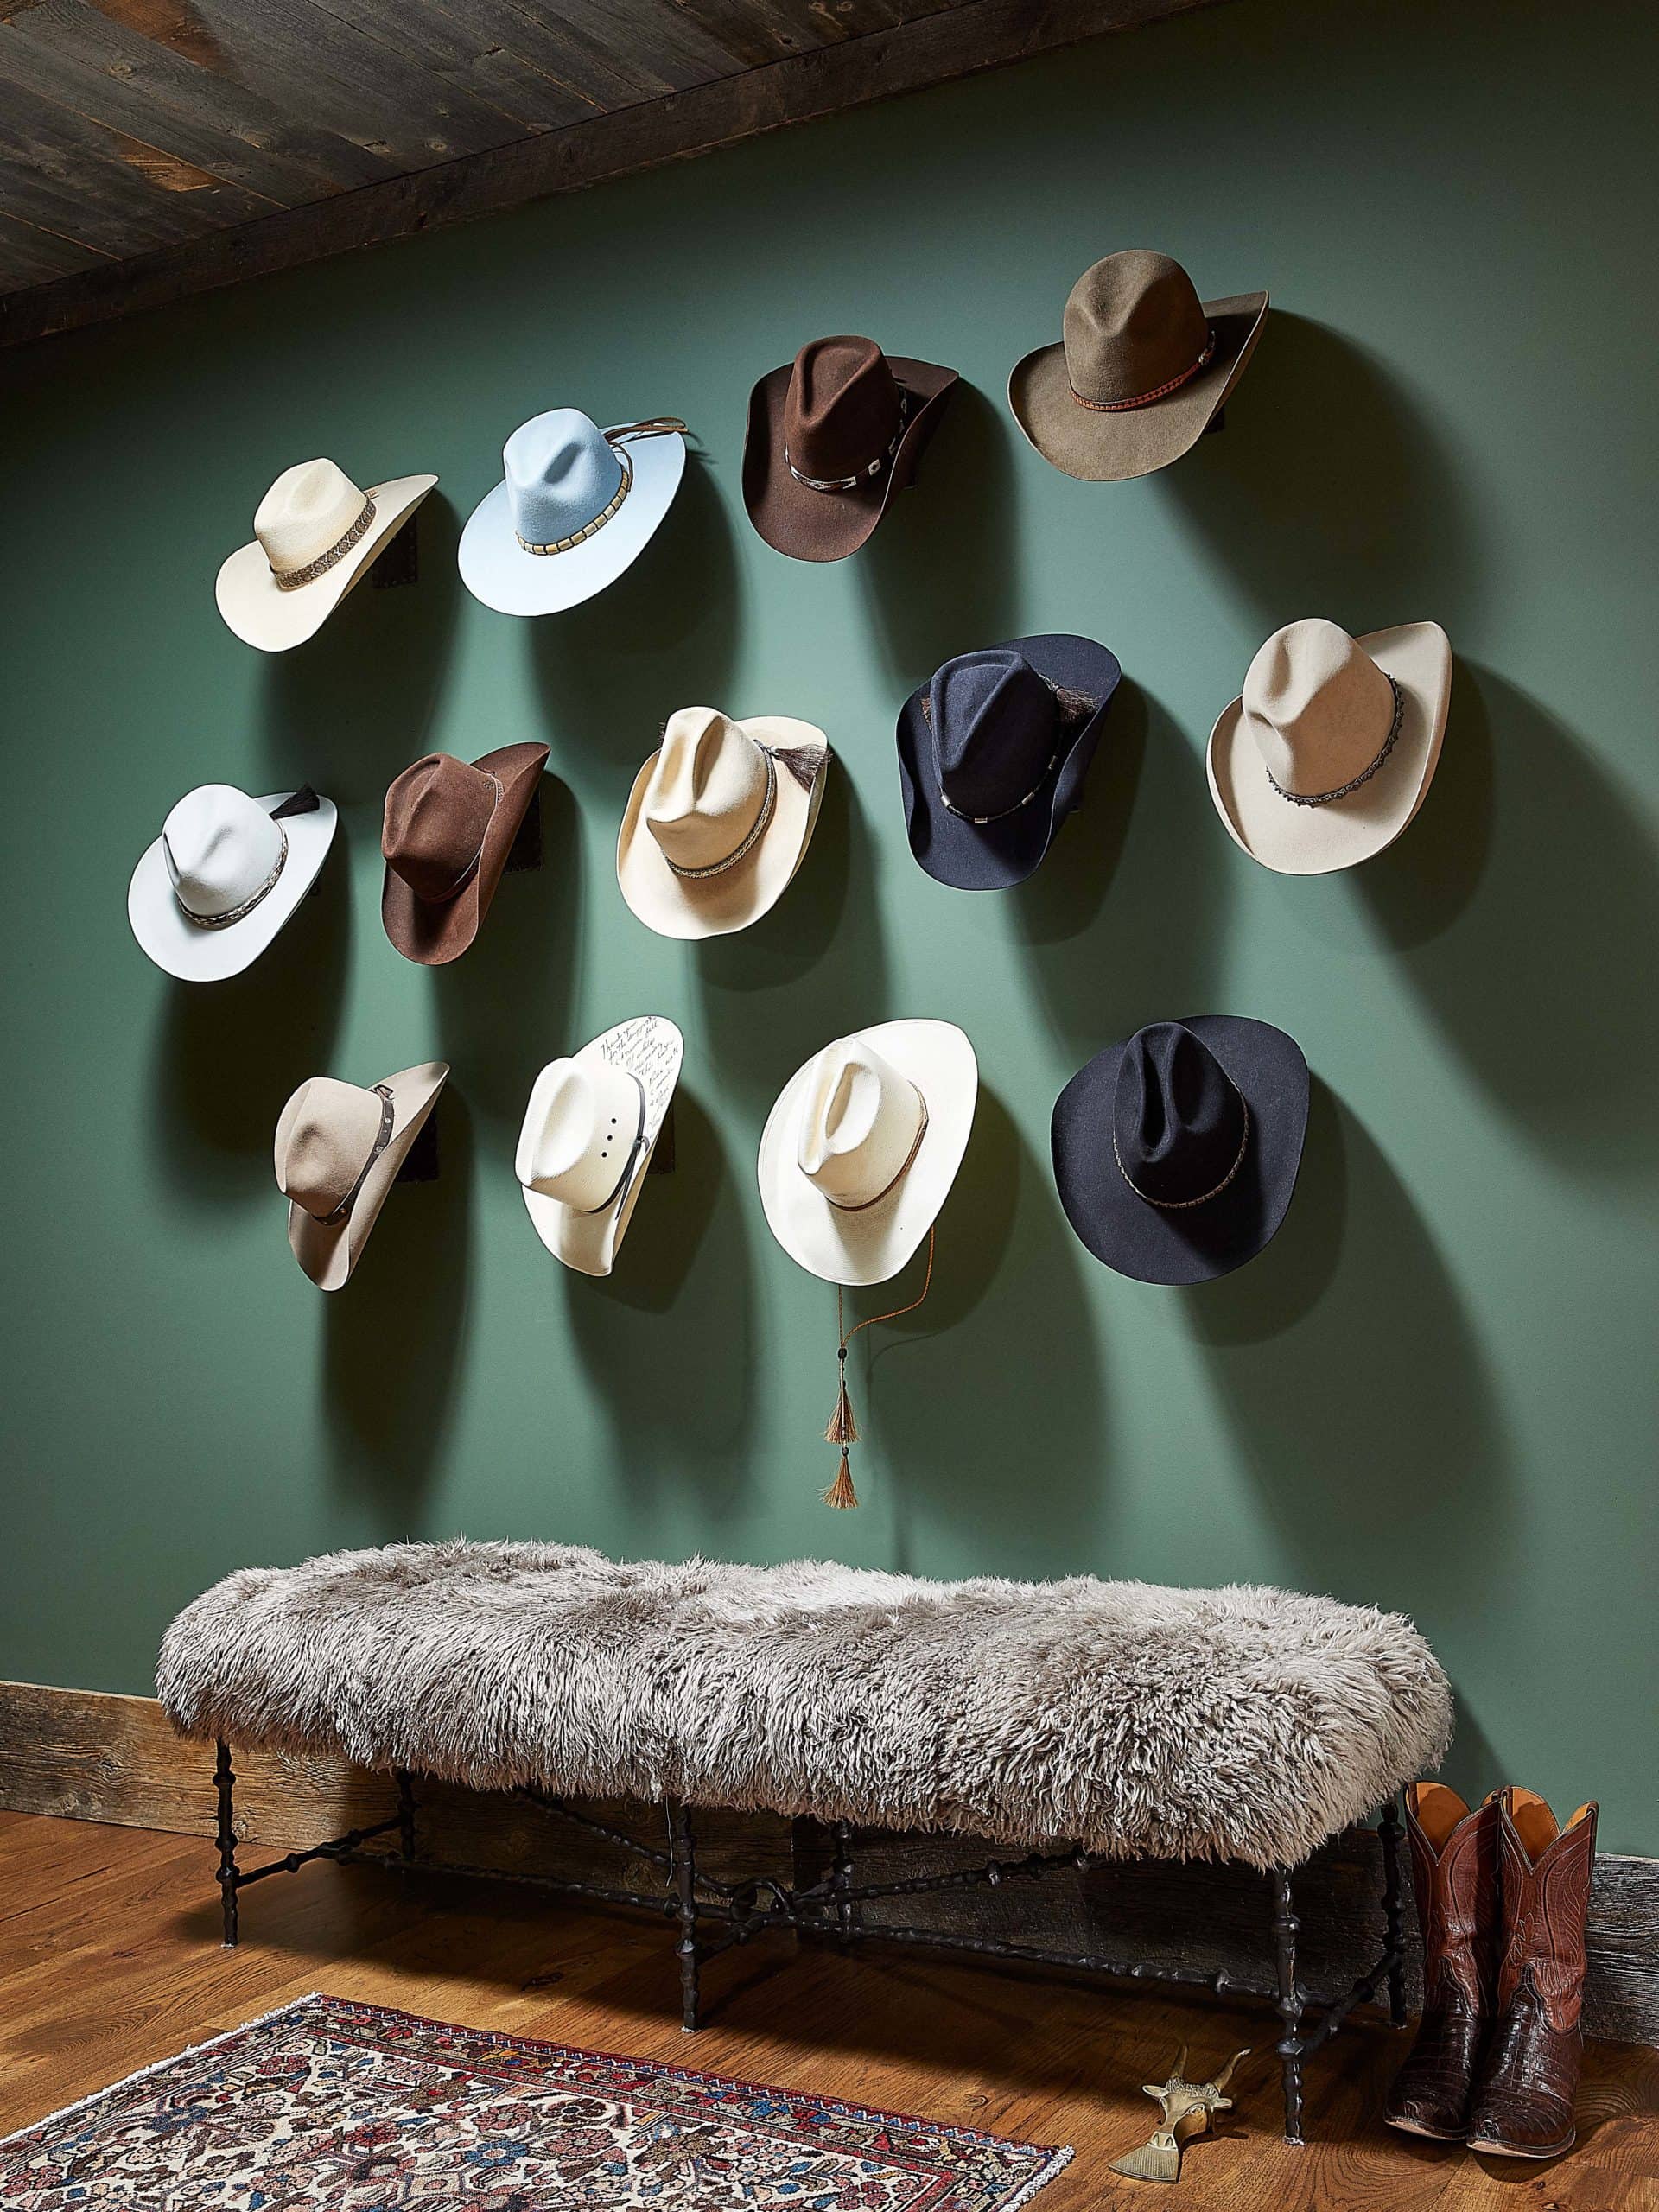 Decorative wall display collection of cowboy hats over a sheepskin covered bench.